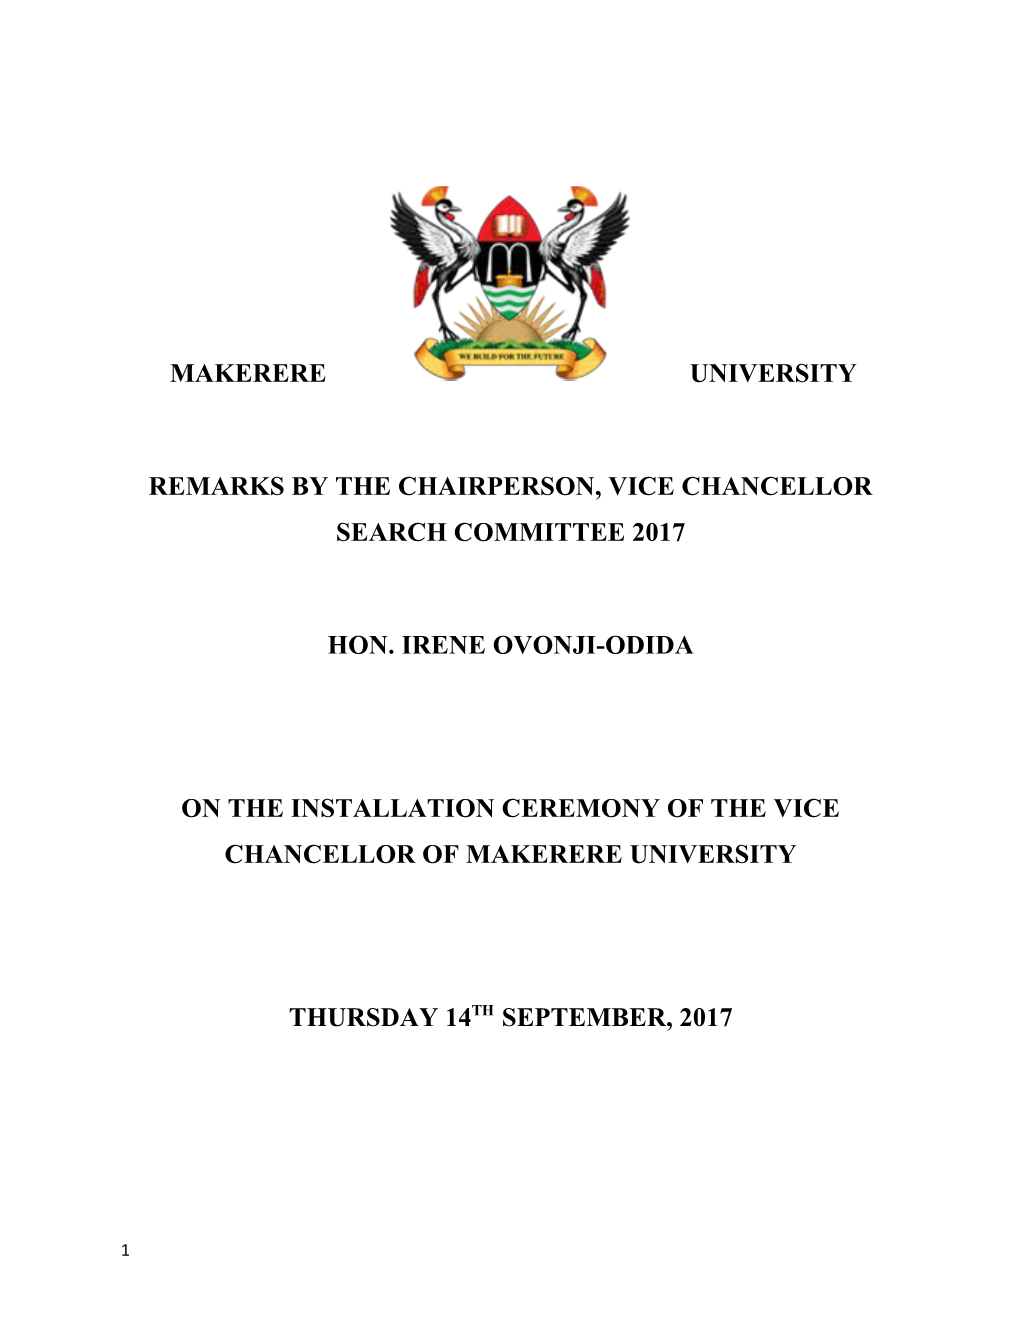 Remarks by the Chairperson, Vice Chancellor Search Committee 2017